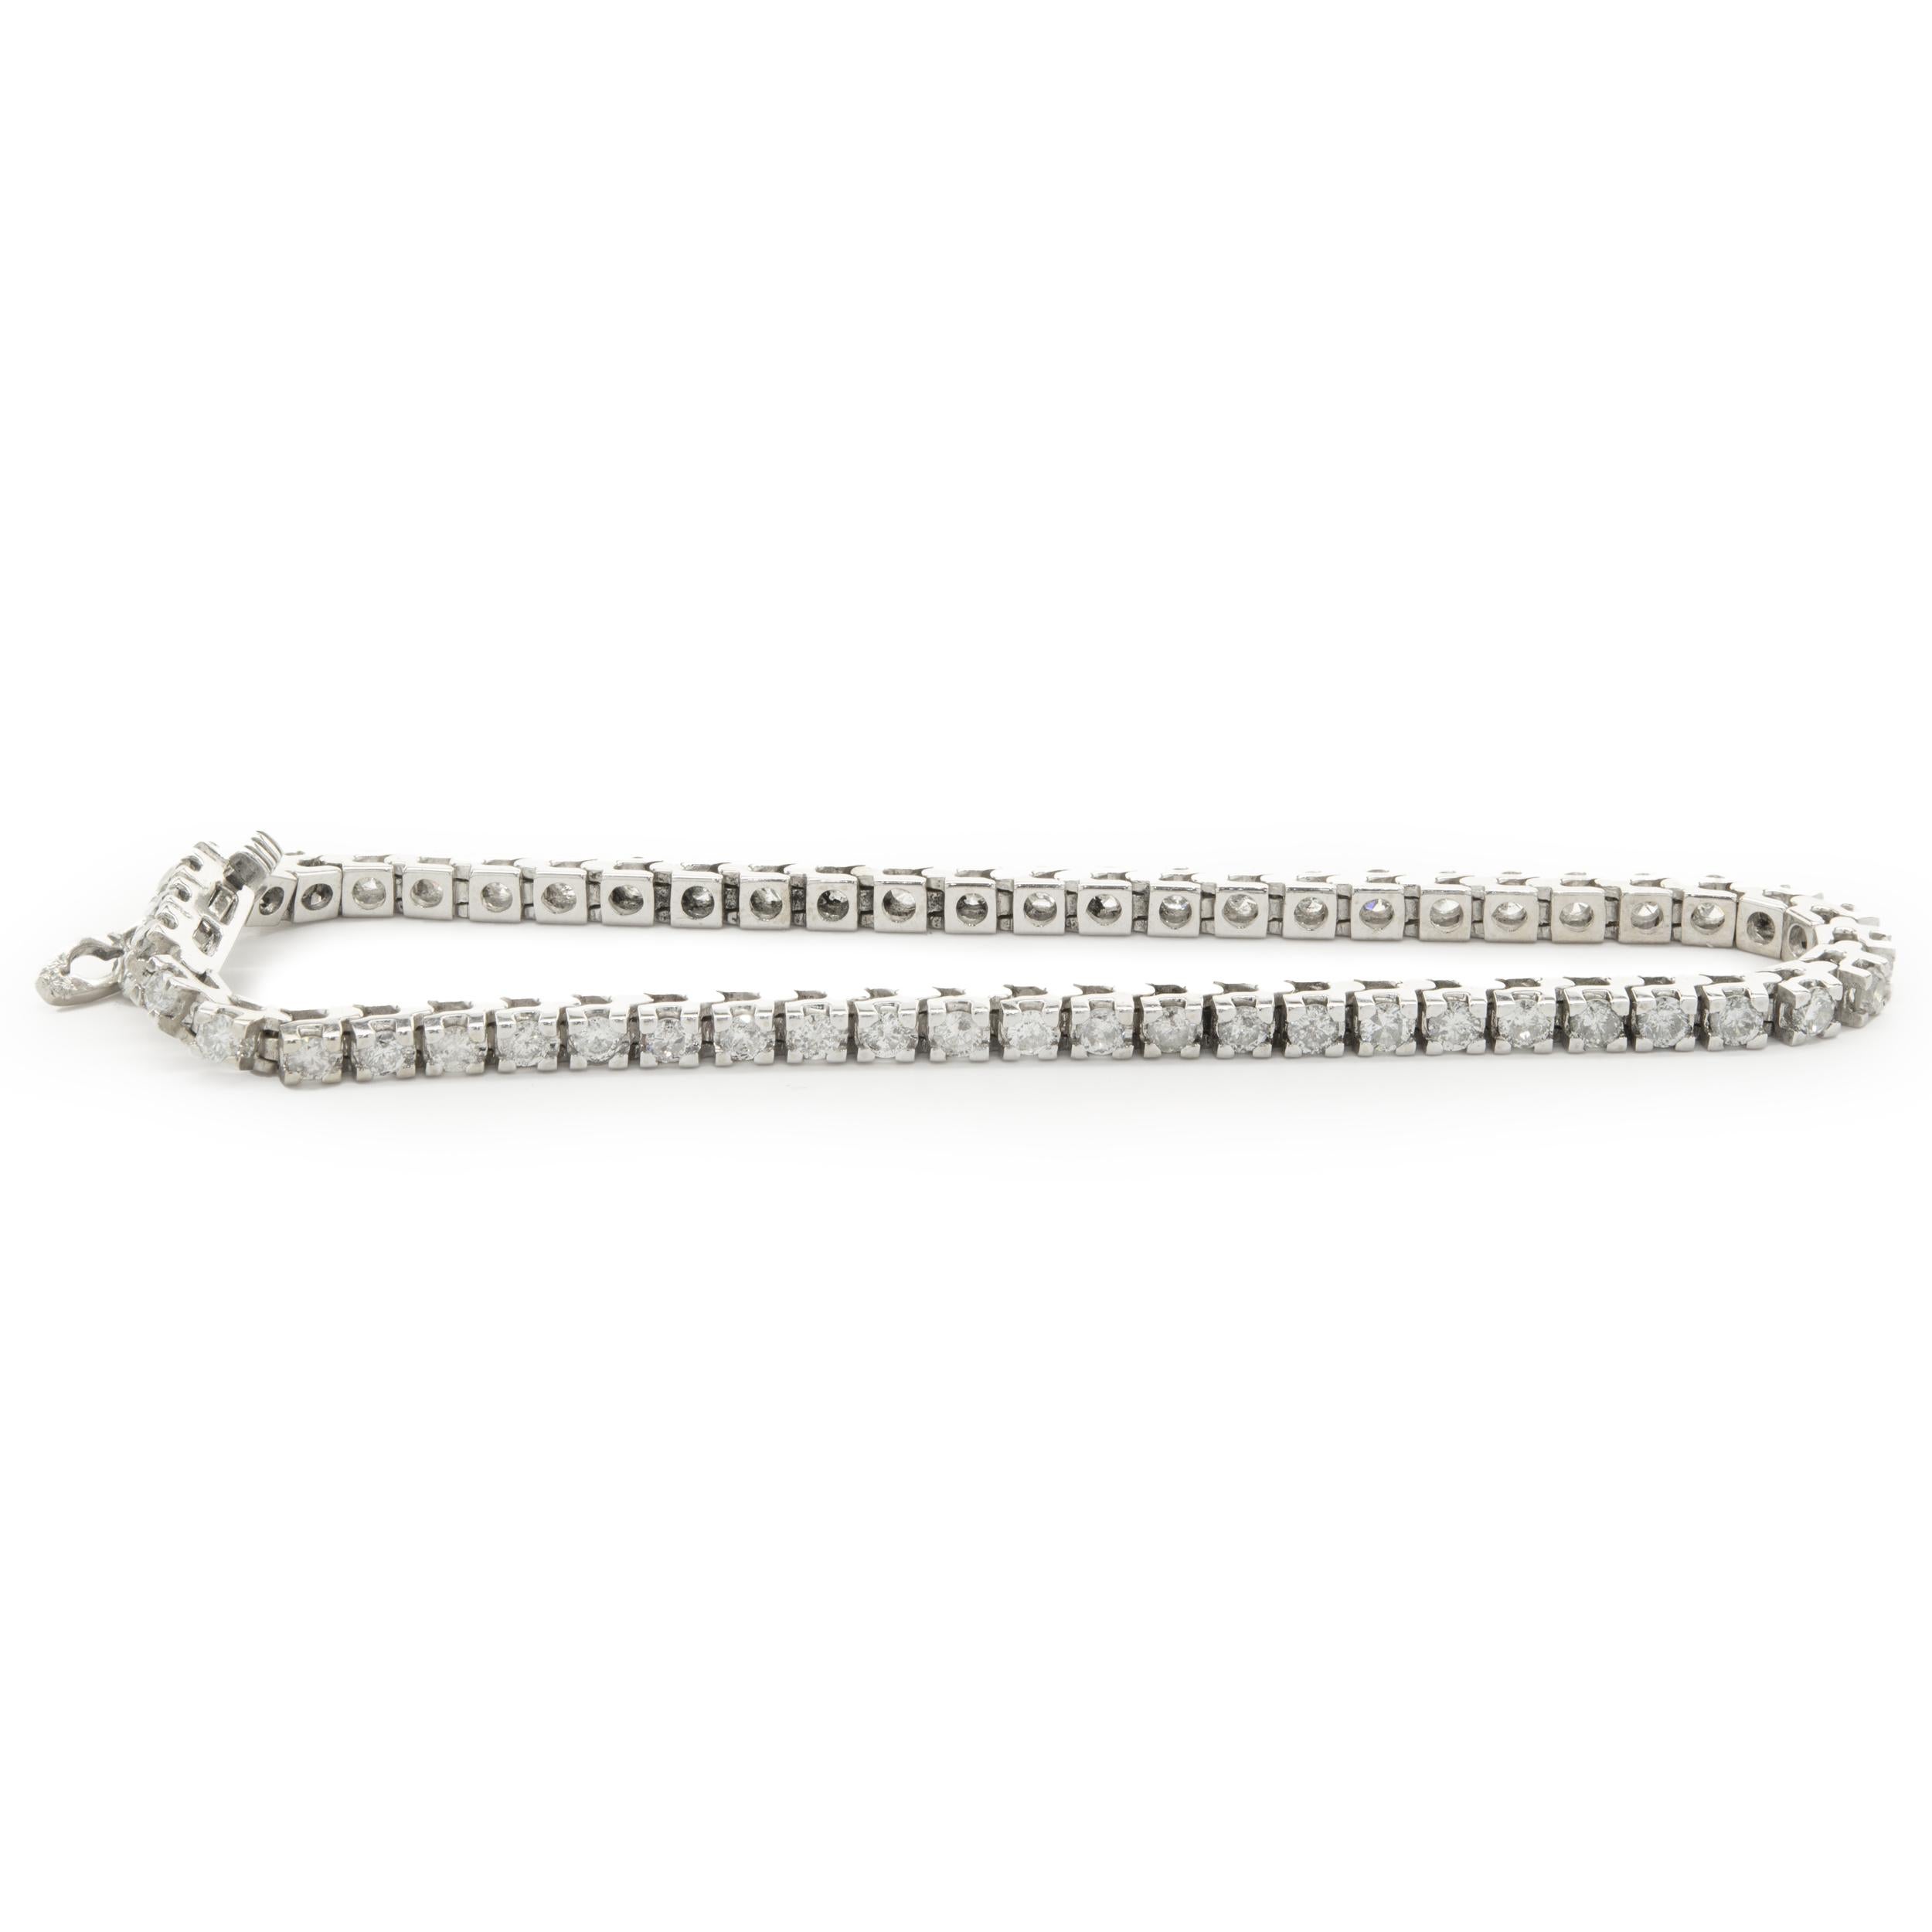 Designer: custom
Material: 14K white gold
Diamond: 55 round brilliant= 2.75cttw
Color: H / I
Clarity: I1
Dimensions: bracelet will fit up to a 7.25inch wrist
Weight: 12.90 grams
